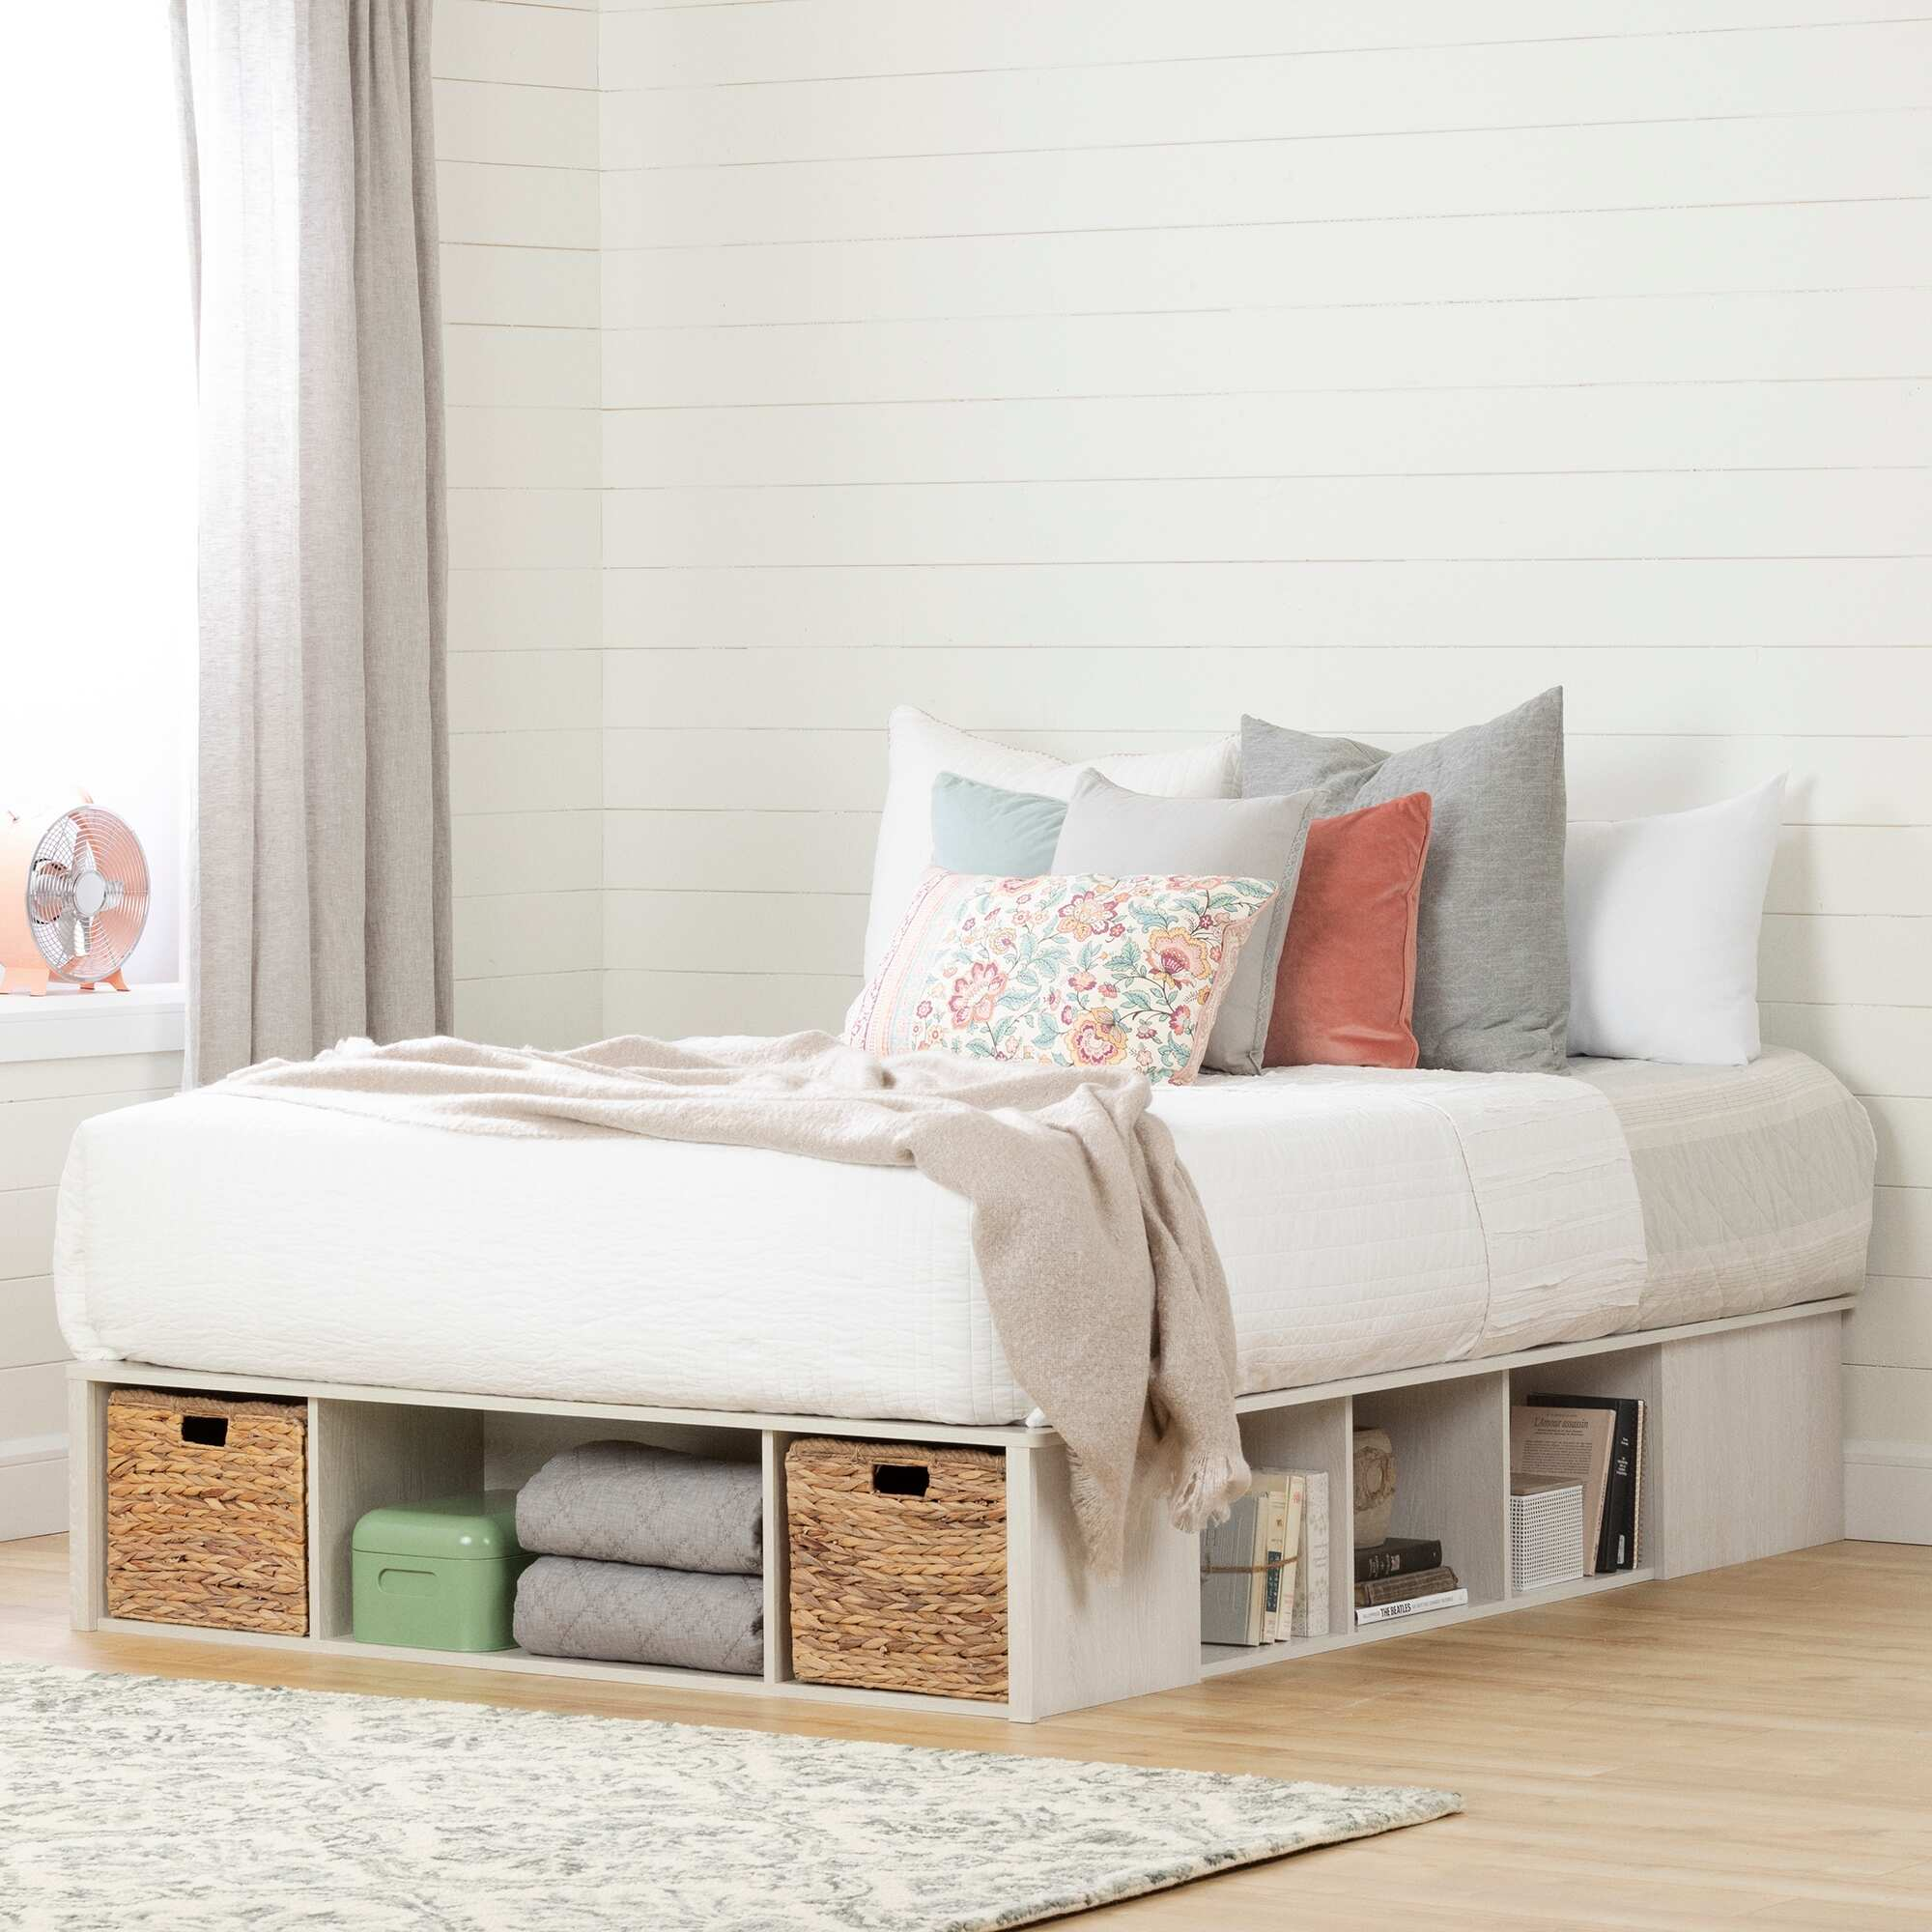 How-to-Build-a-Bed-Platform-With-Storage